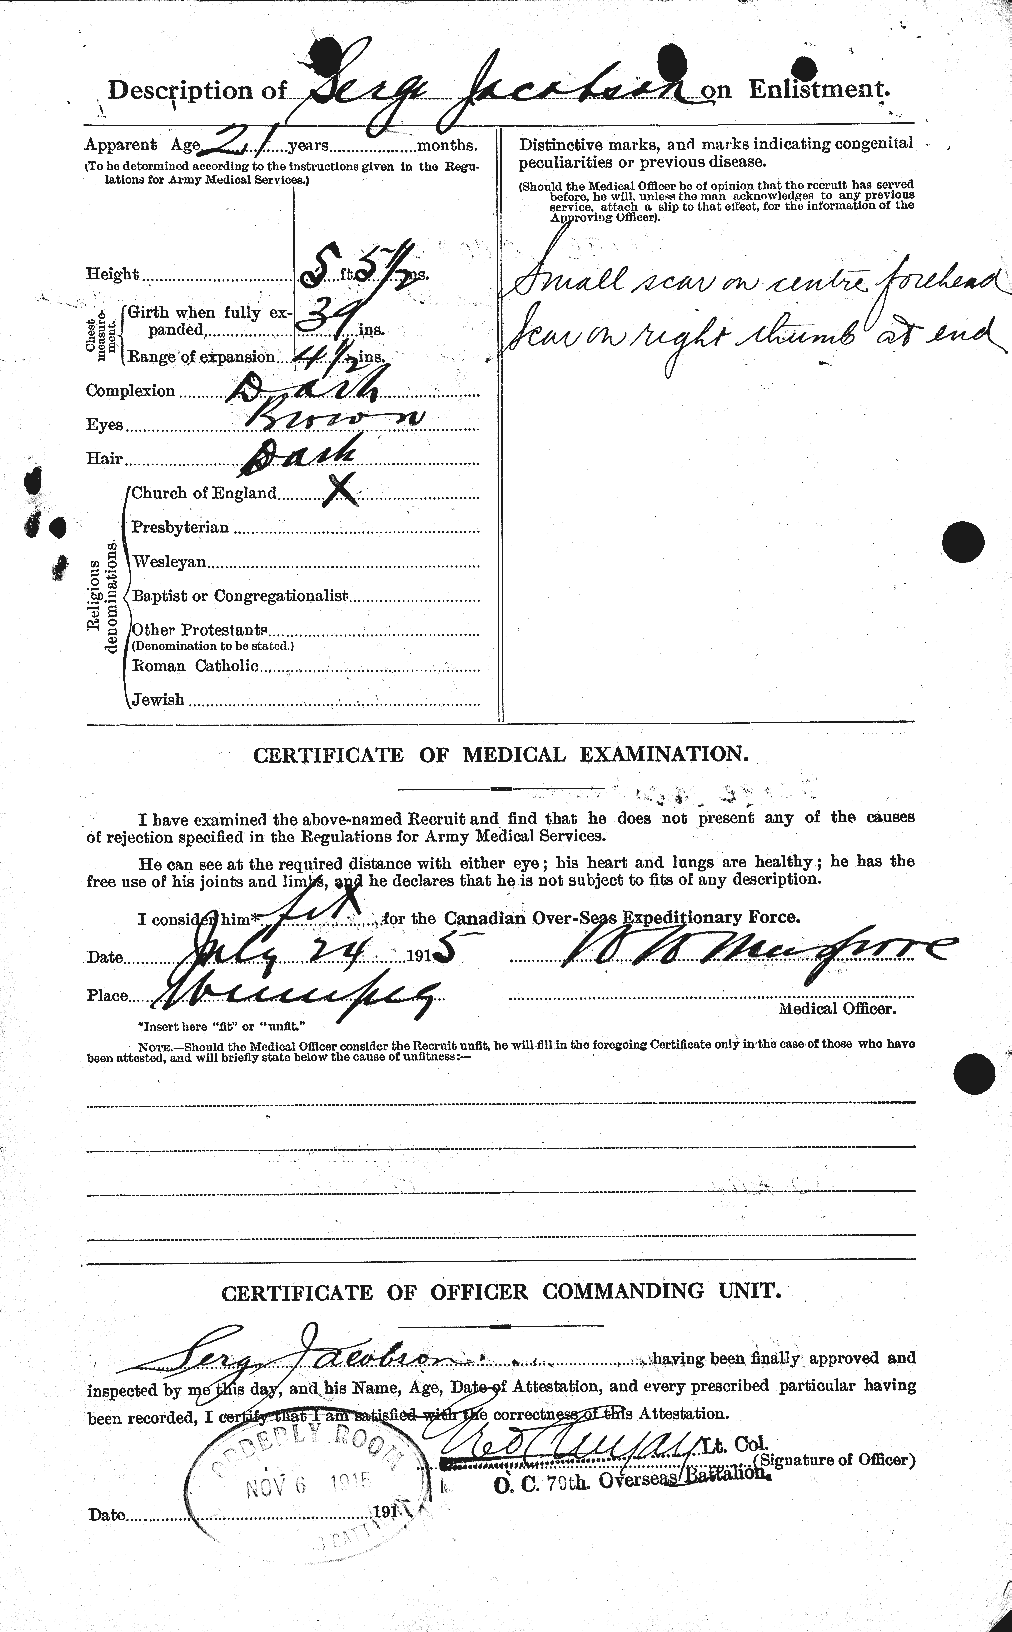 Personnel Records of the First World War - CEF 413375b